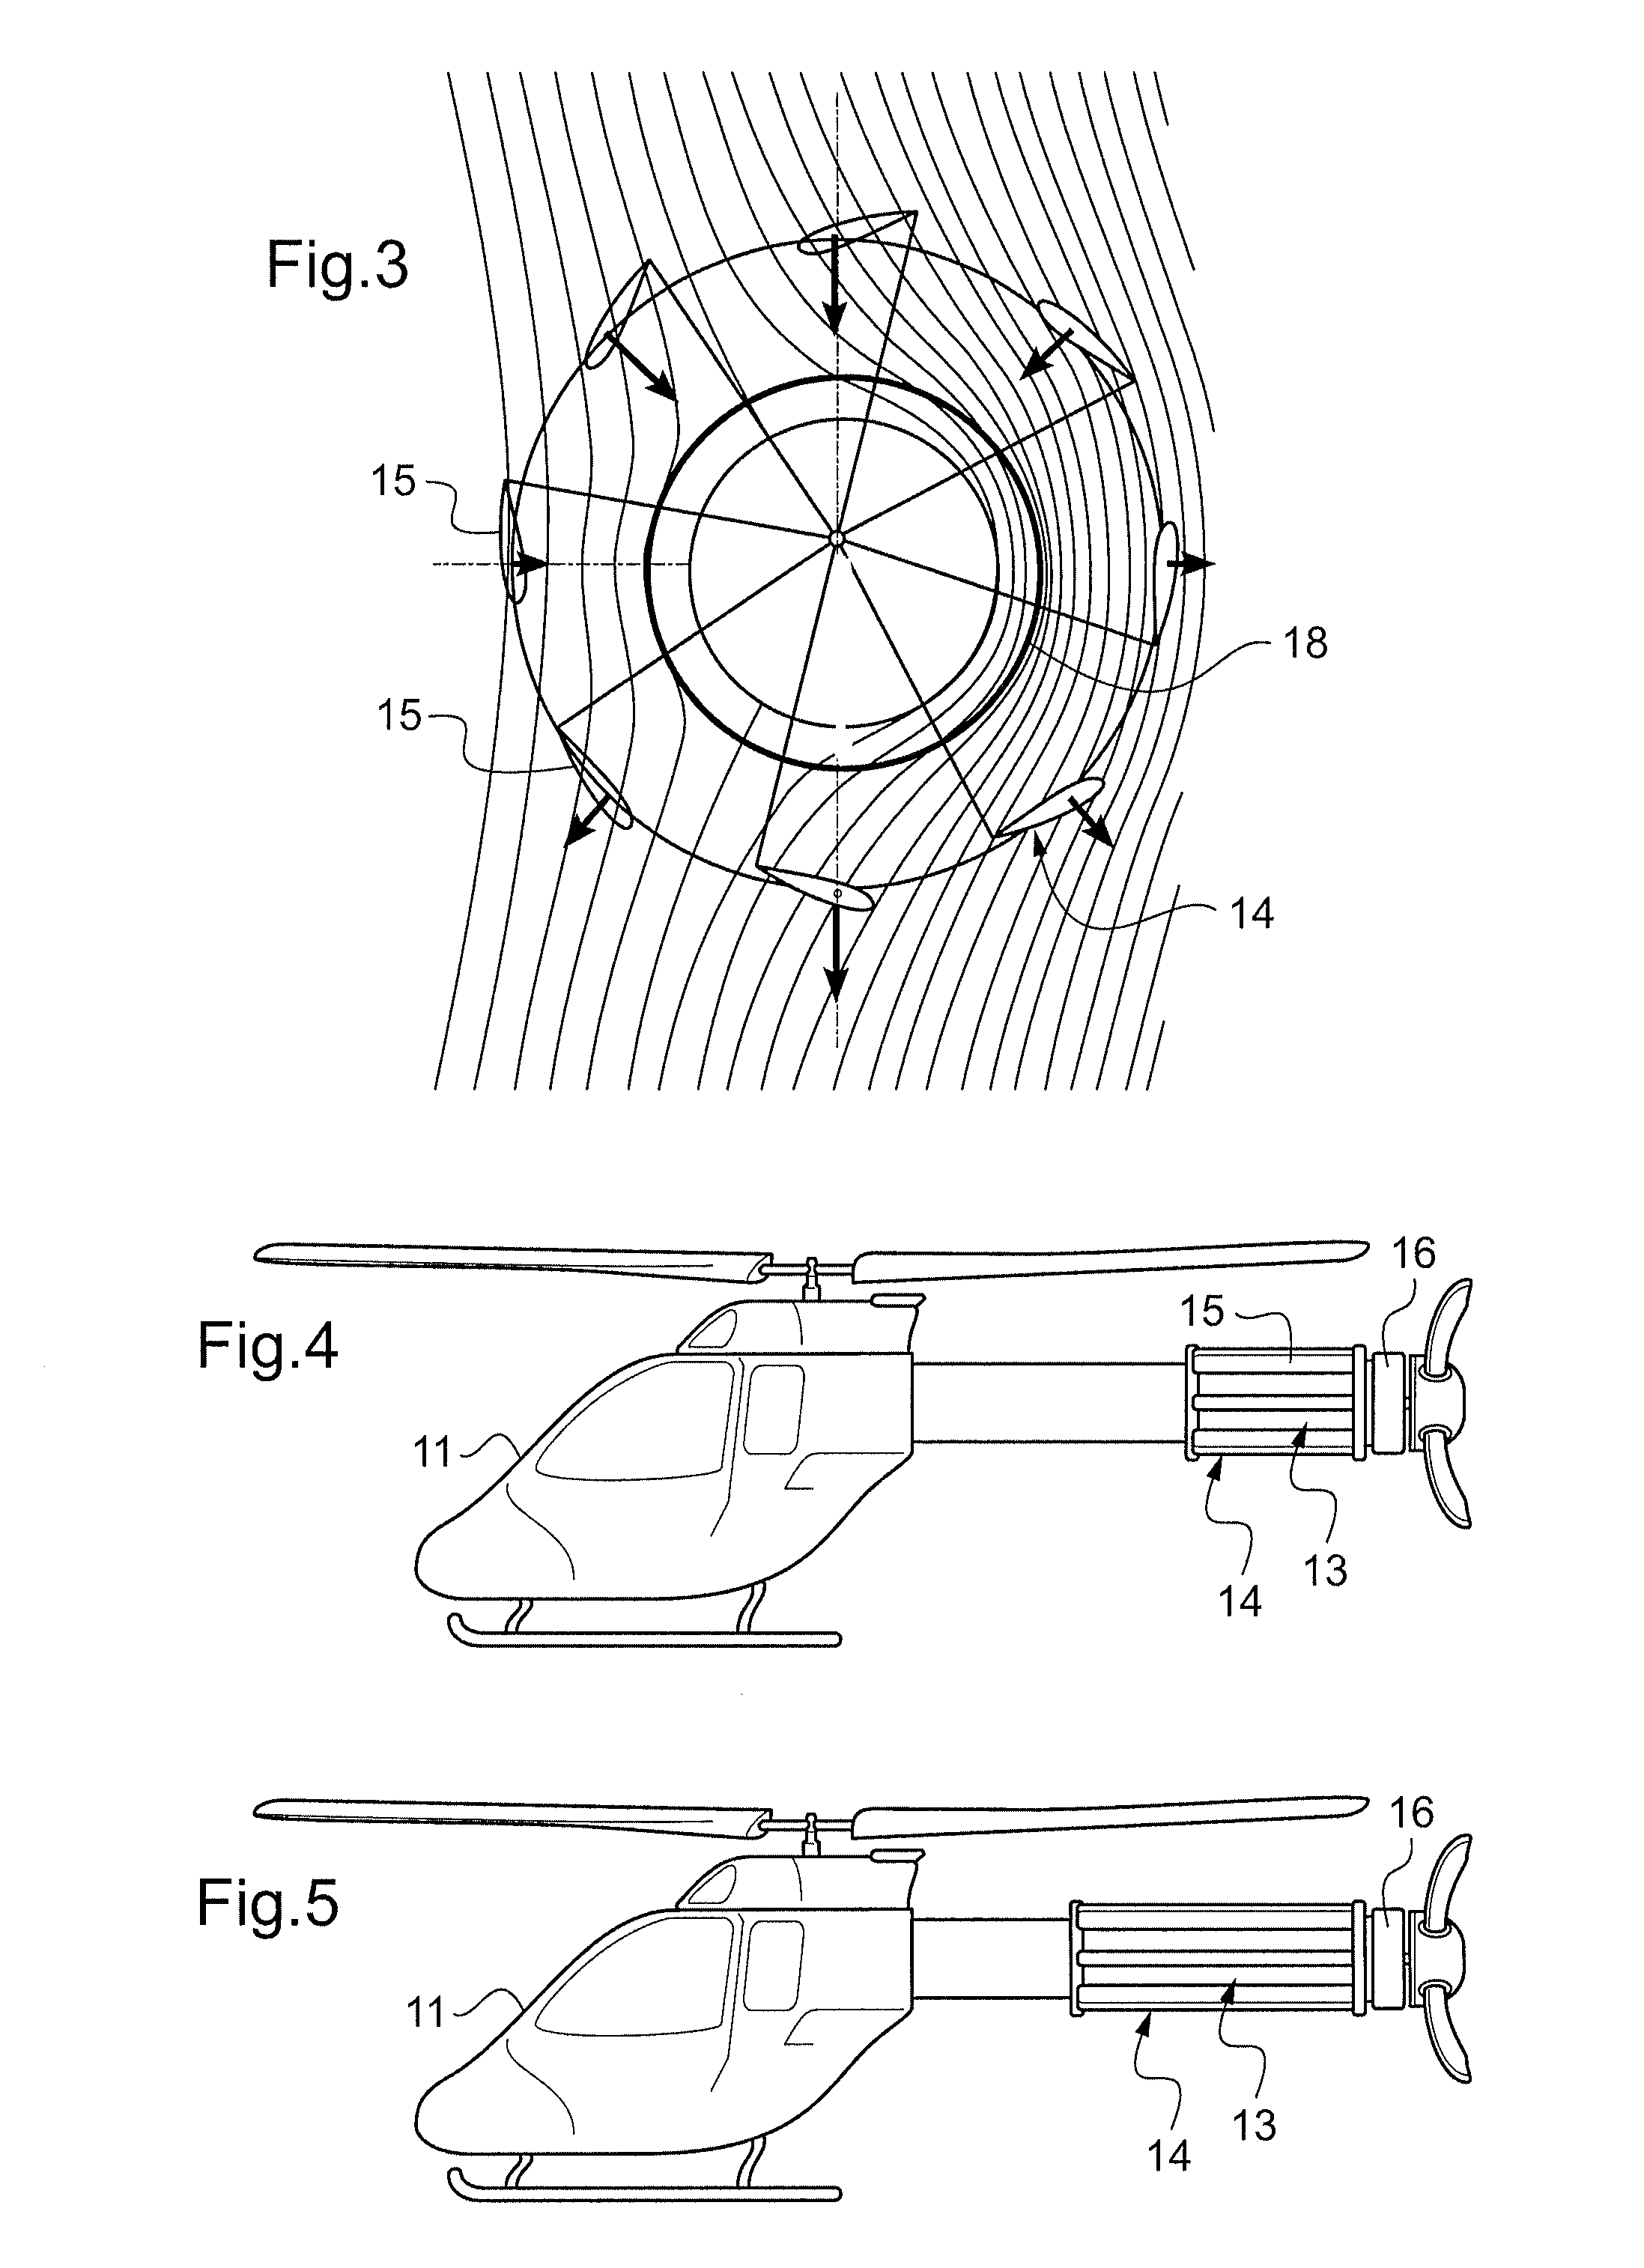 Helicopter with cycloidal rotor system